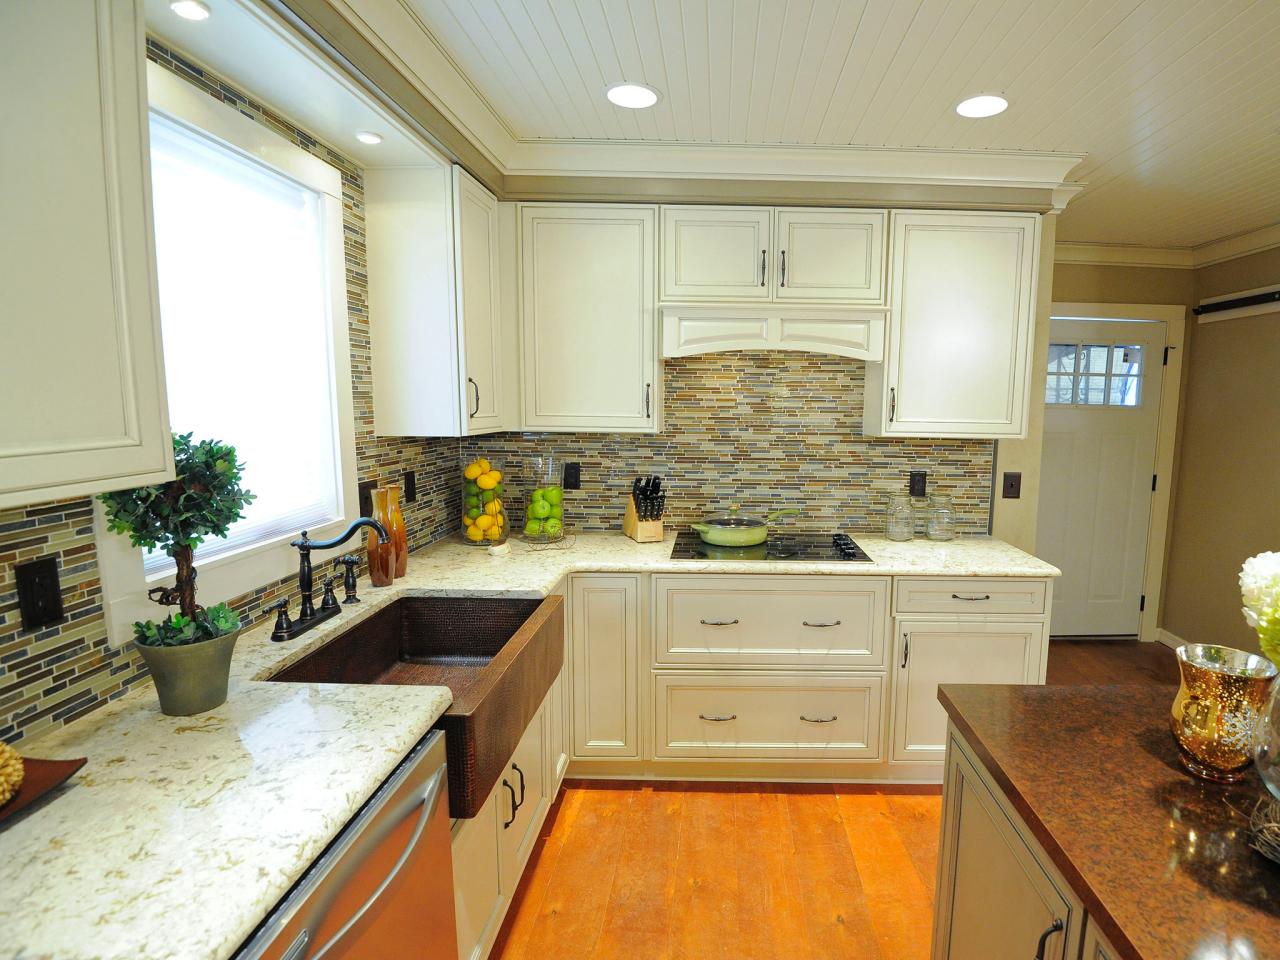 Cheap Kitchen Countertops Pictures, Options & Ideas HGTV